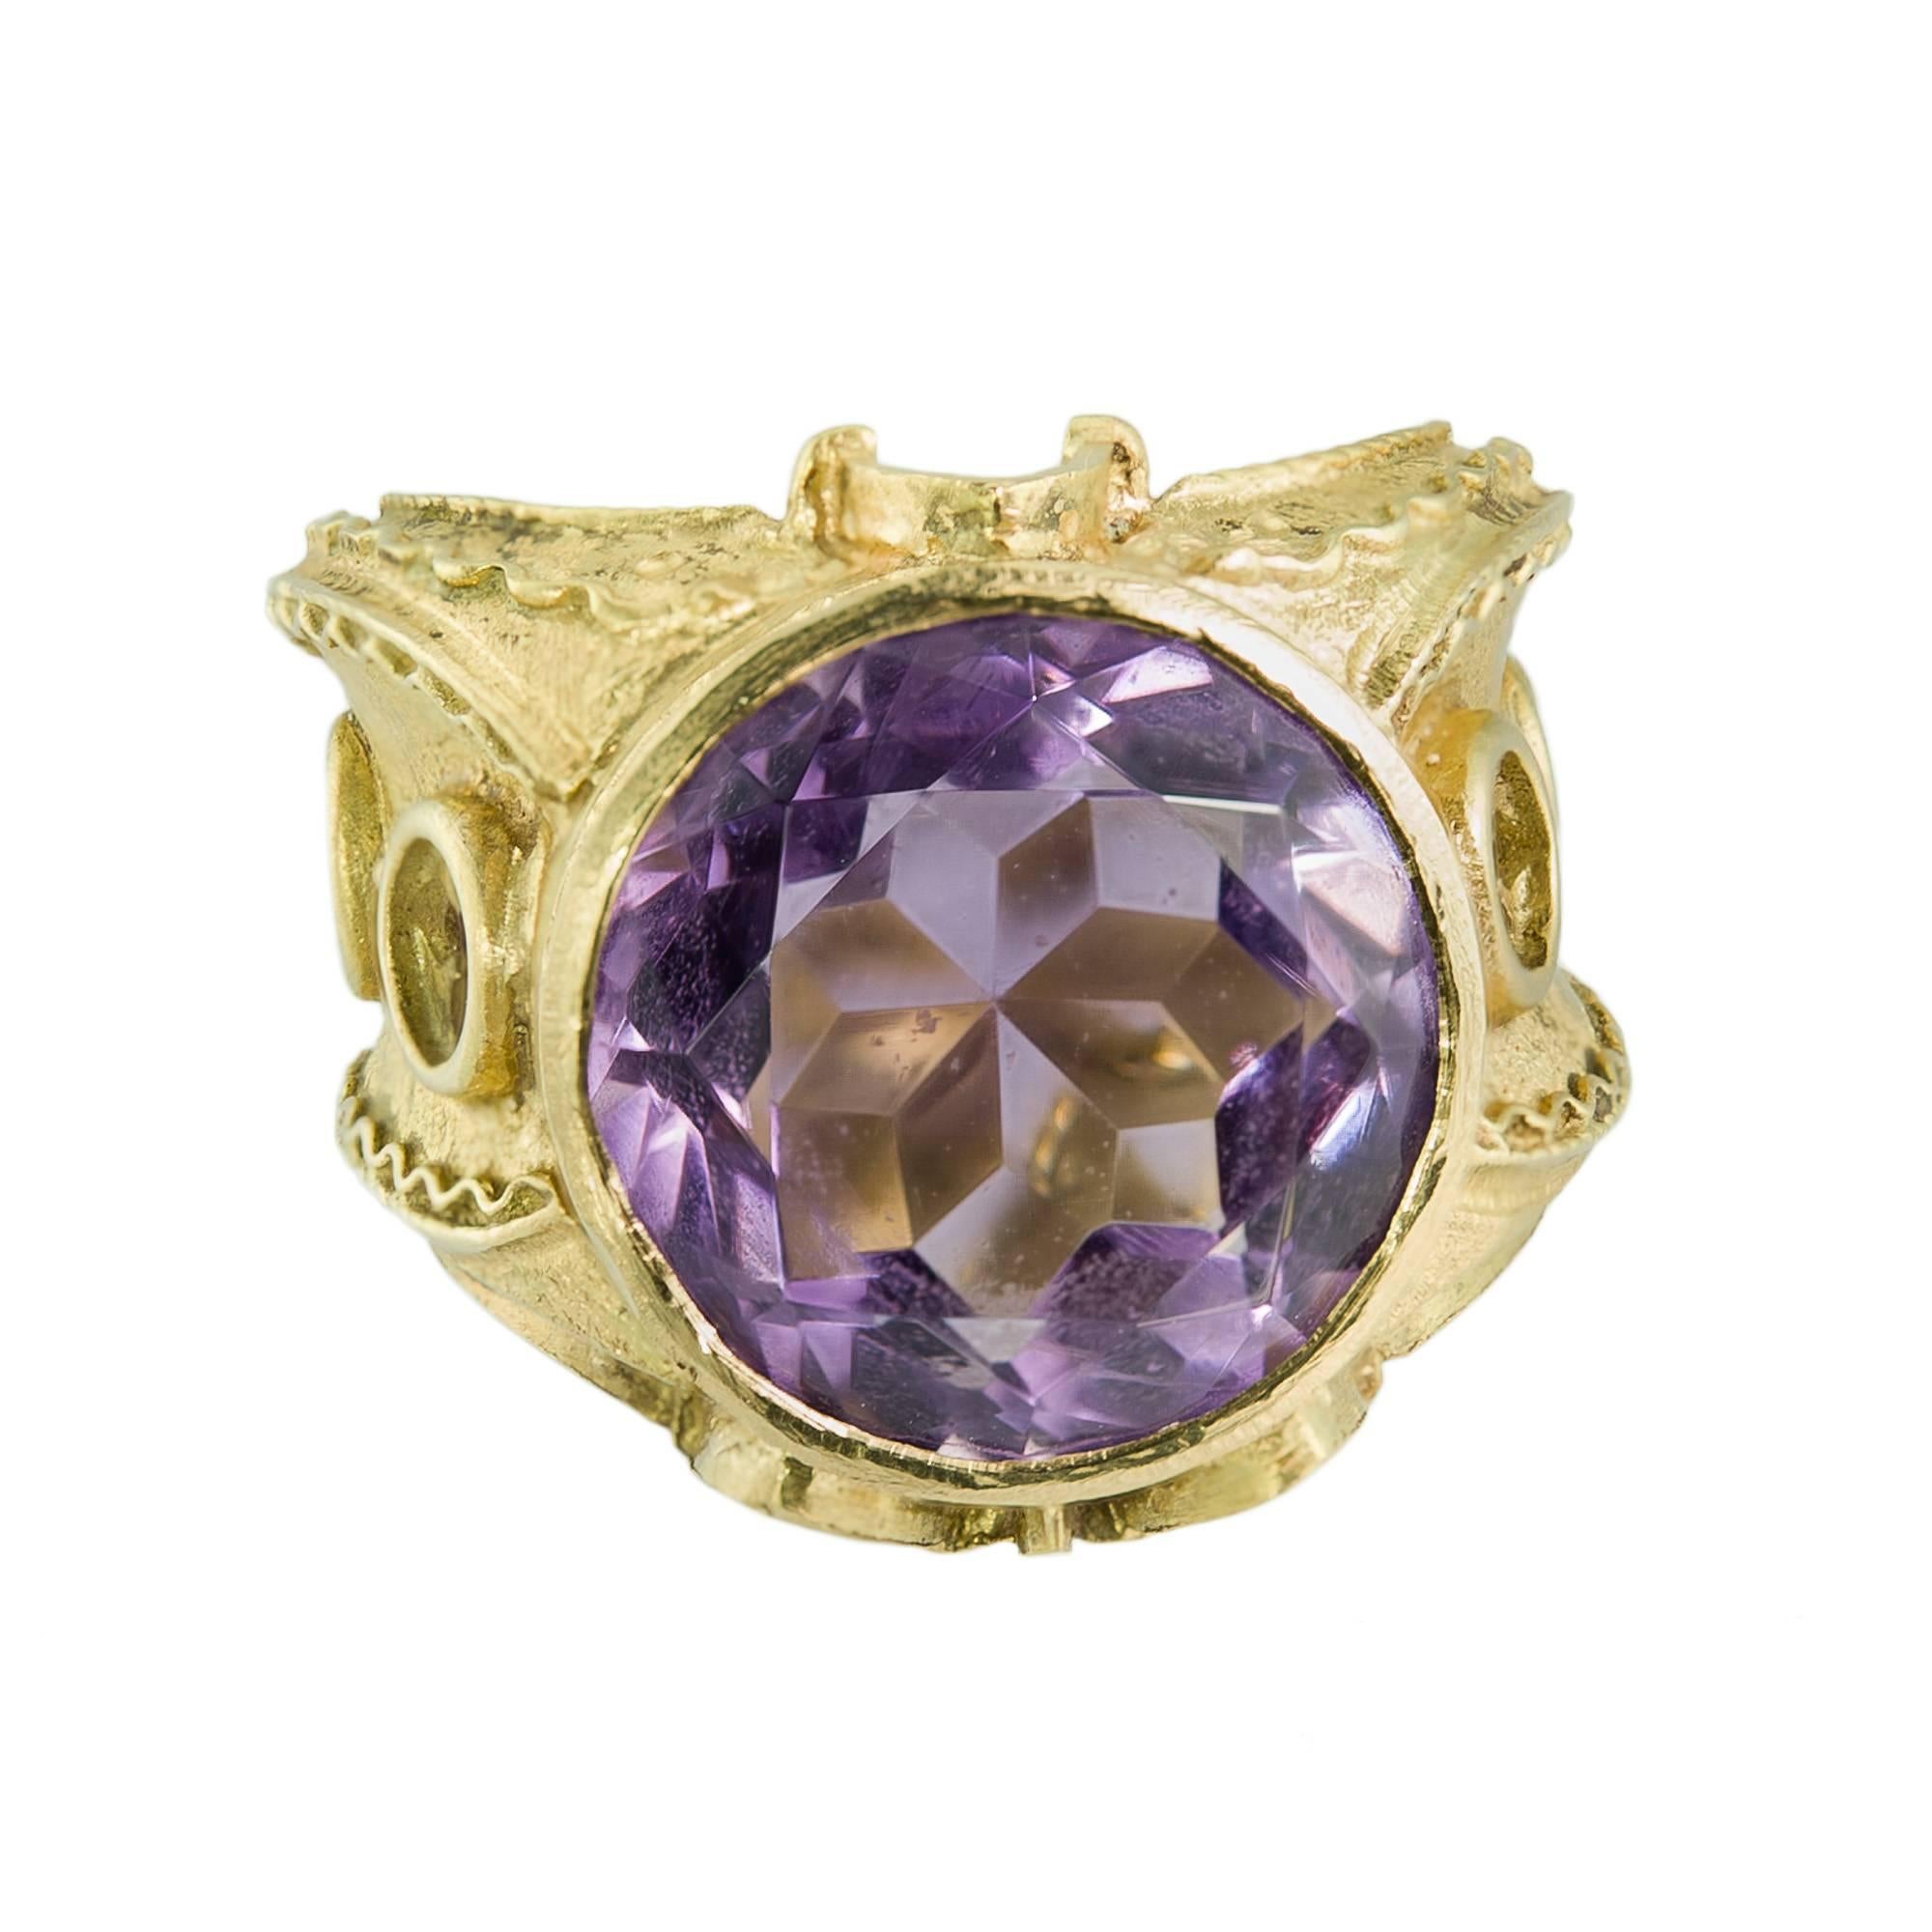 18K gold and amethyst
Circe IV is a needle-punched ring with Gothic architecture and a crown supporting stones.
Lost-wax casting and embedding of stones.
Handmade.
Possible engraving at no extra cost.
